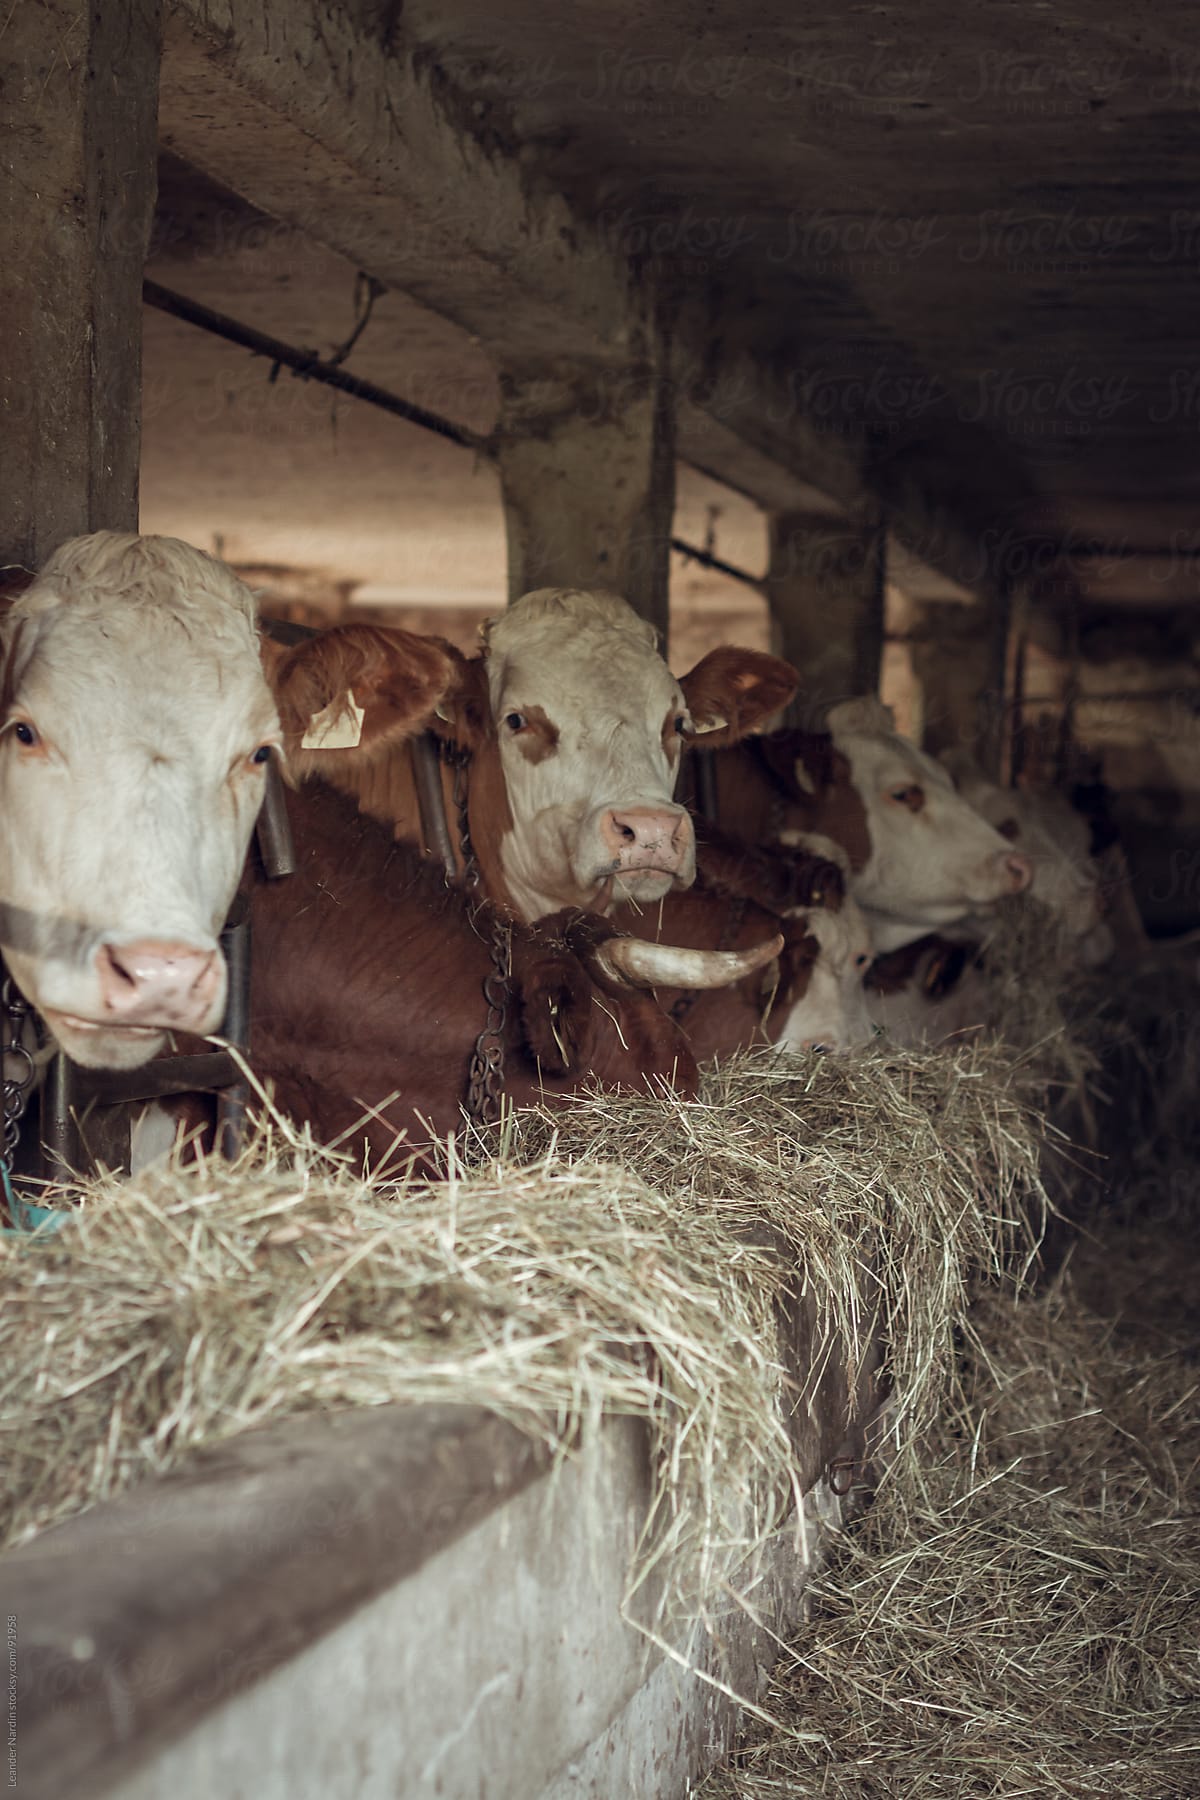 cows in a cowshed